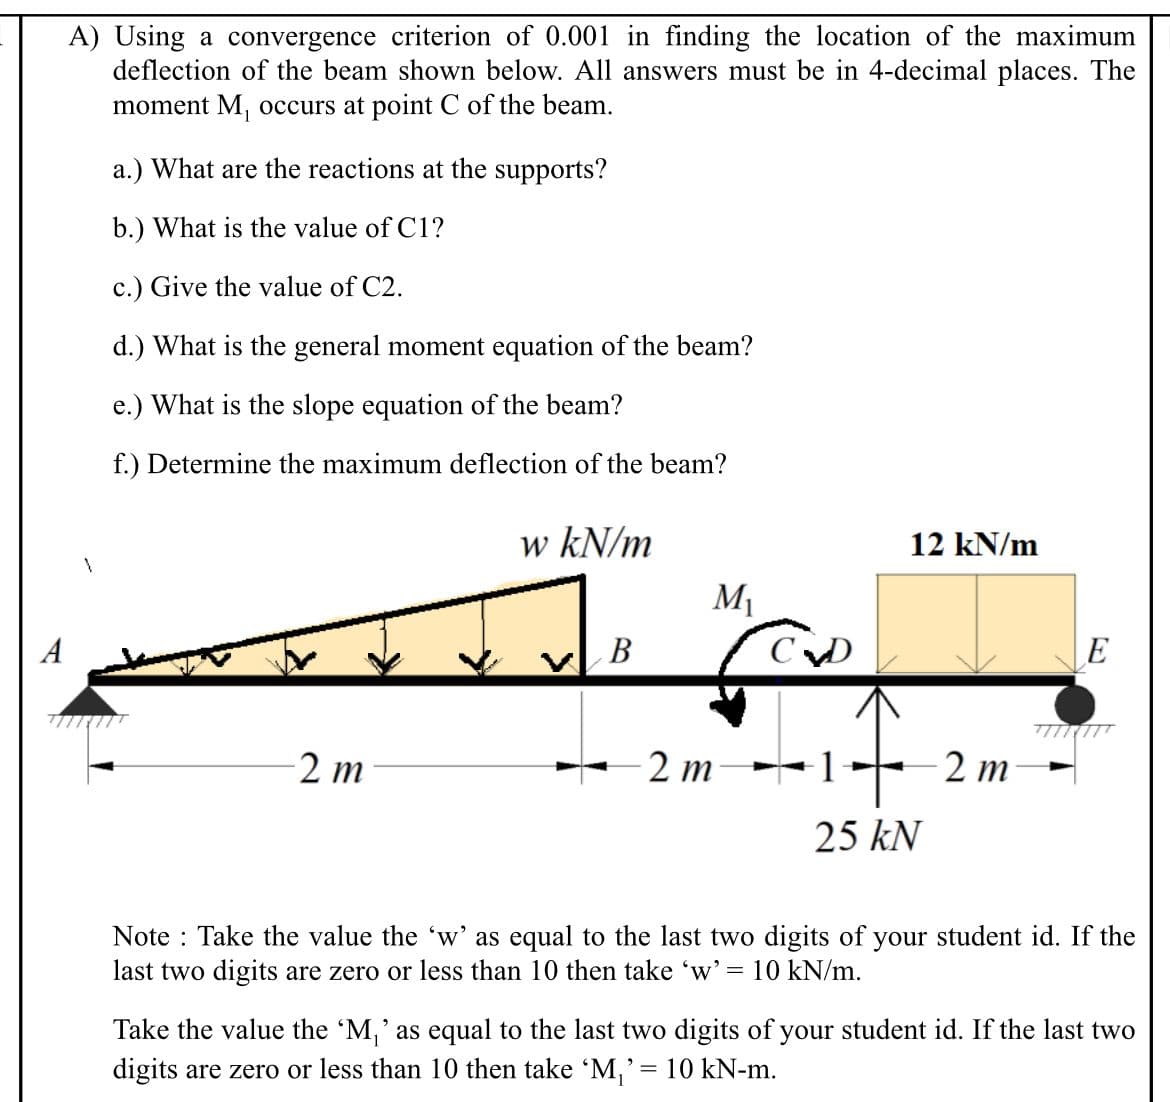 A) Using a convergence criterion of 0.001 in finding the location of the maximum
deflection of the beam shown below. All answers must be in 4-decimal places. The
moment M, occurs at point C of the beam.
a.) What are the reactions at the supports?
b.) What is the value of C1?
c.) Give the value of C2.
d.) What is the general moment equation of the beam?
e.) What is the slope equation of the beam?
f.) Determine the maximum deflection of the beam?
w kN/m
12 kN/m
M
A
В
E
2 m
2 m
2 т
25 kN
Note : Take the value the 'w' as equal to the last two digits of your student id. If the
last two digits are zero or less than 10 then take 'w' =
10 kN/m.
Take the value the 'M,' as equal to the last two digits of your student id. If the last two
digits are zero or less than 10 then take 'M,'= 10 kN-m.
